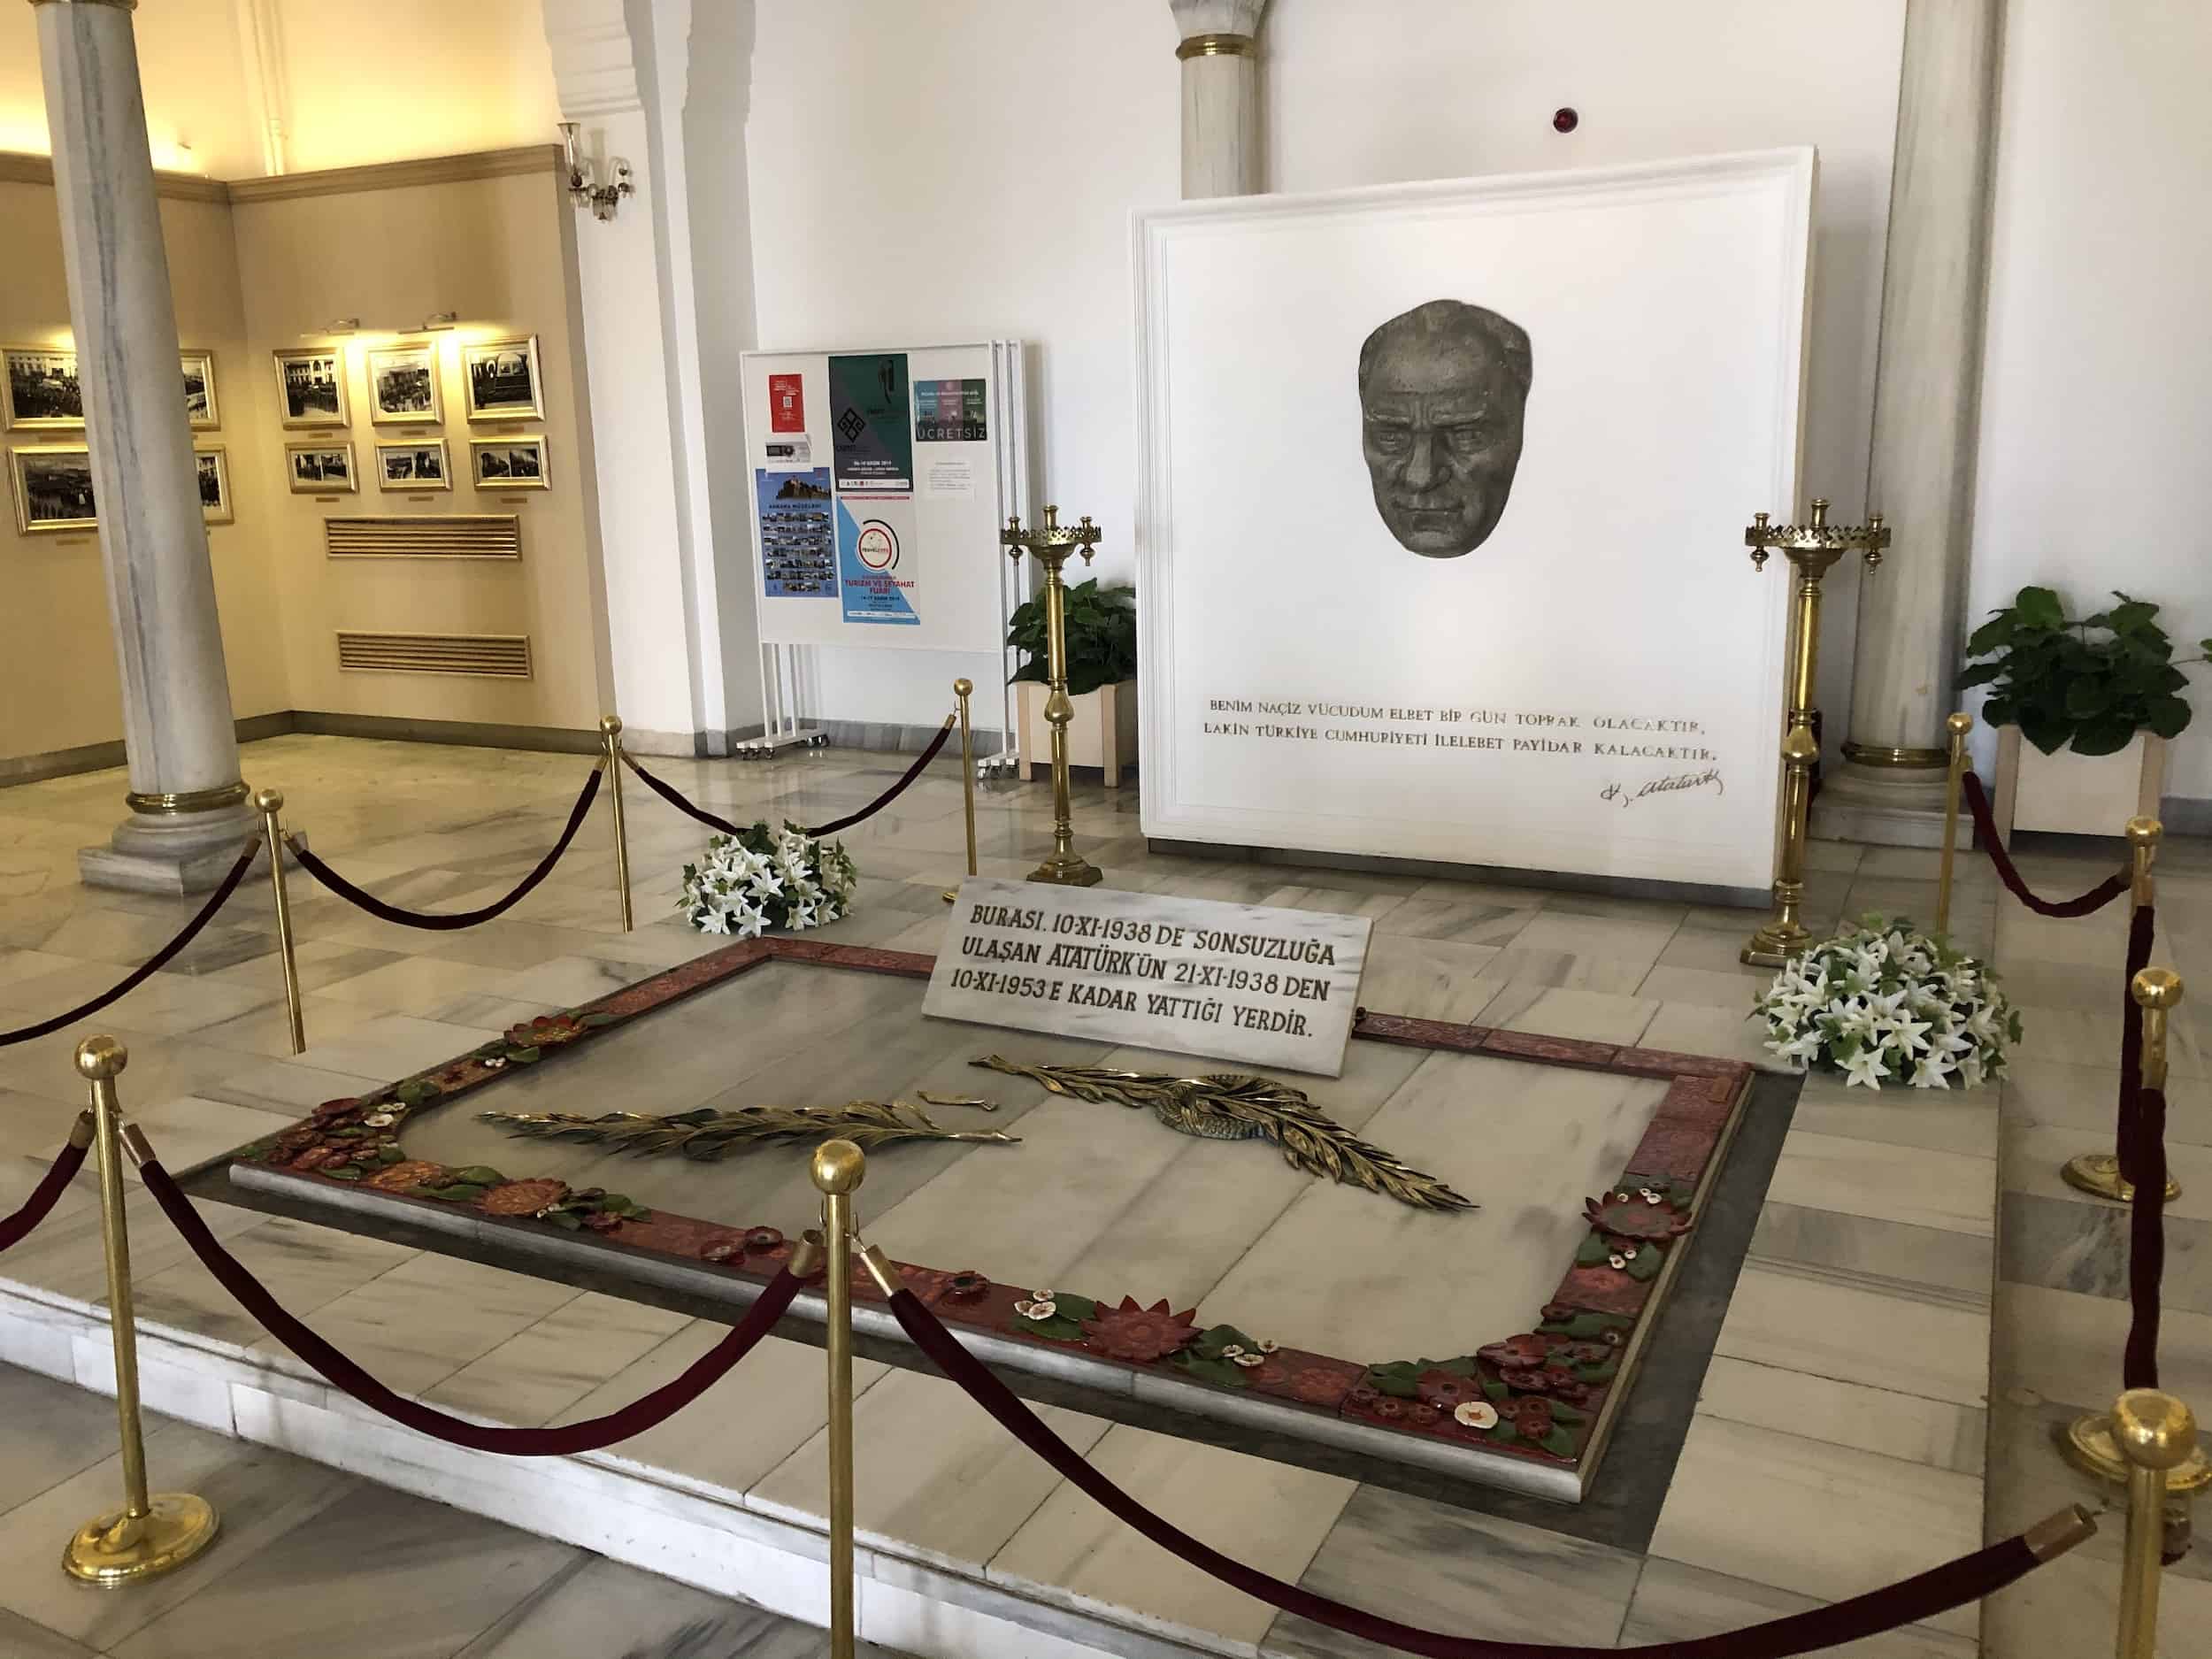 Atatürk's temporary resting place at the Ethnography Museum in Ankara, Turkey